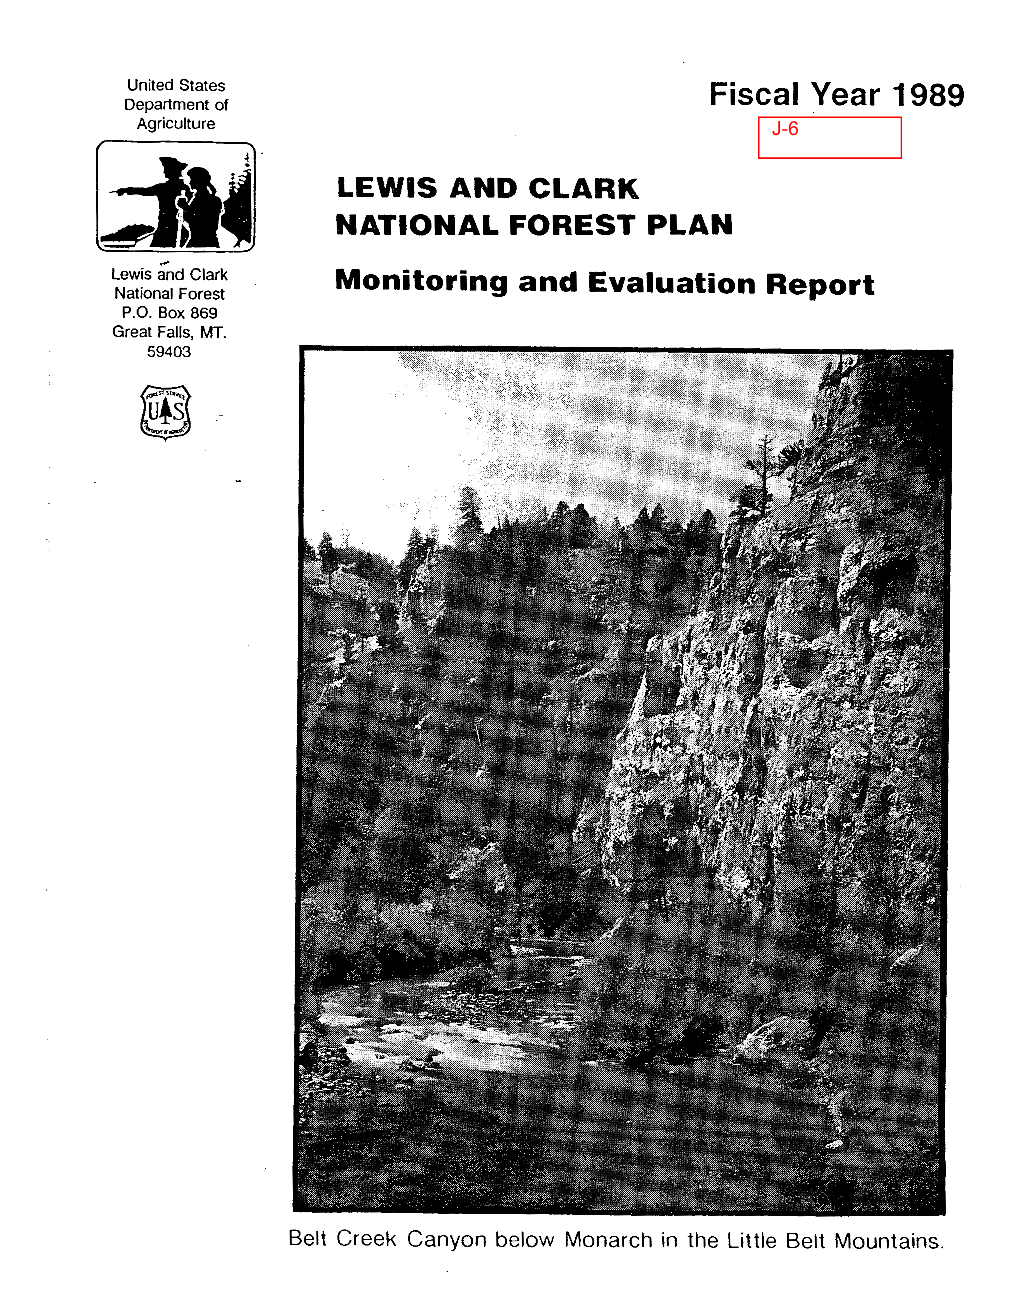 Fiscal Year 1989 Agriculture 3-88 1, LEWIS and CLARK NATIONAL FOREST PLAN